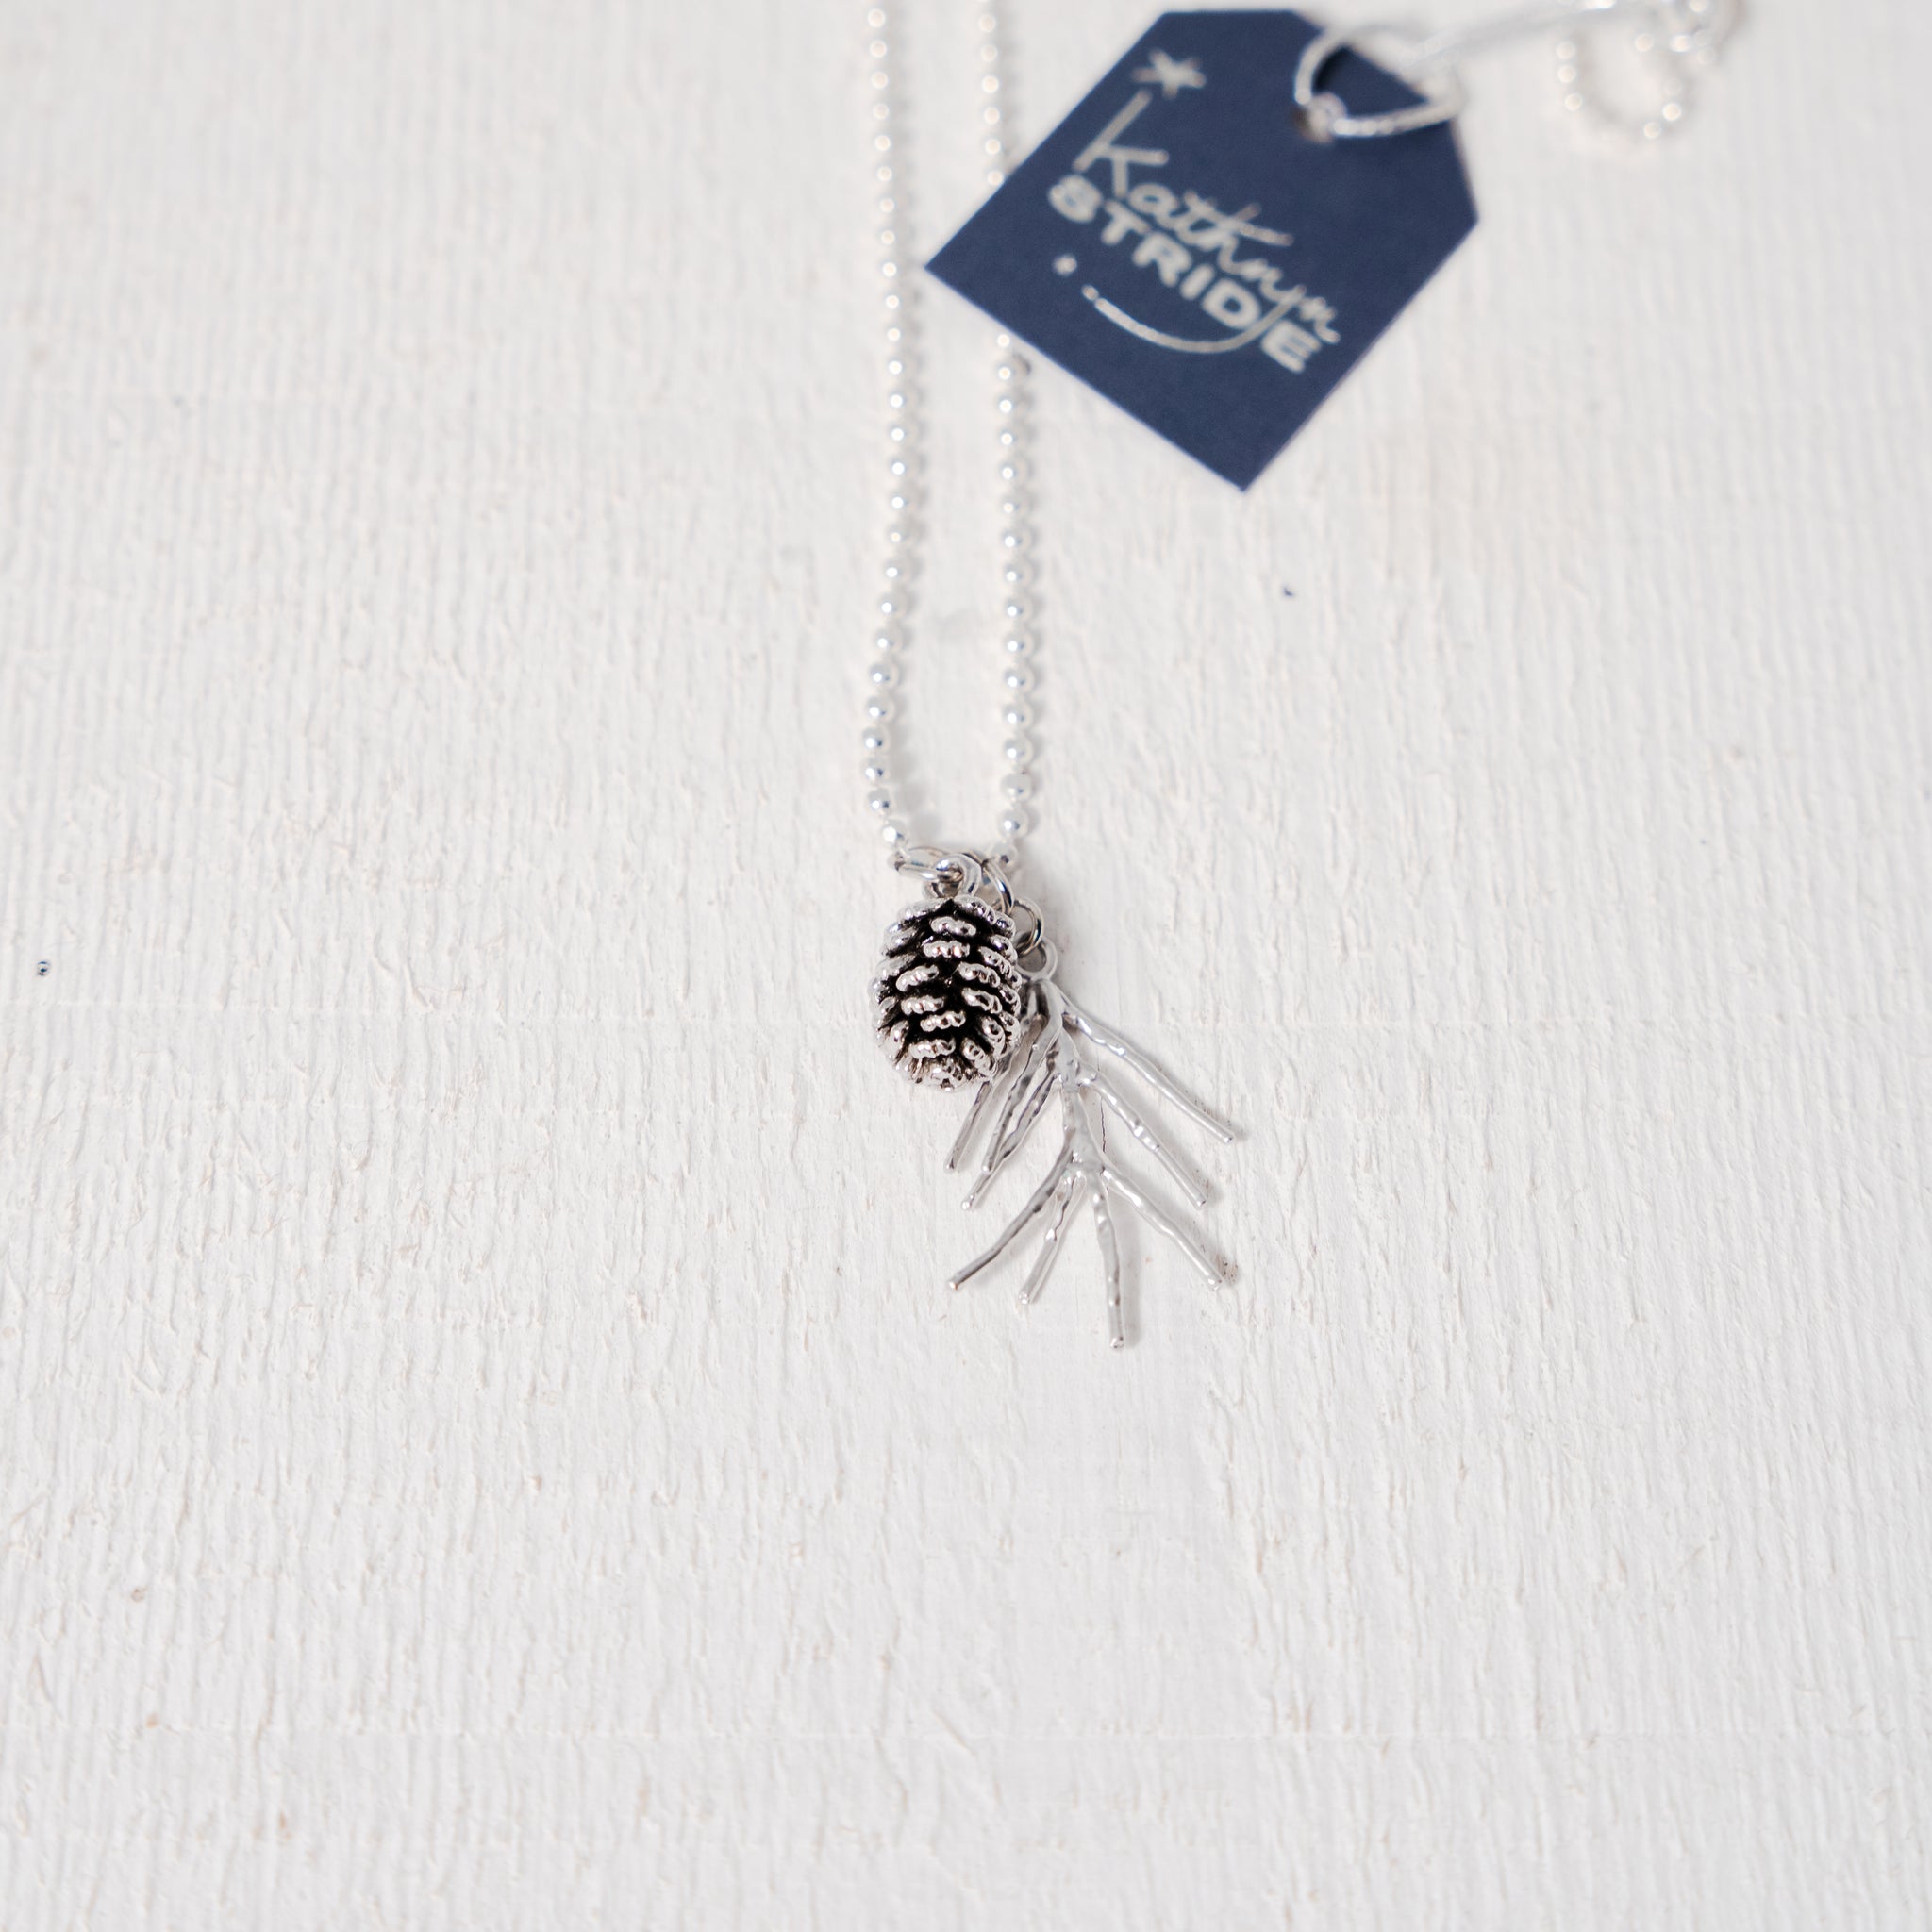 Antiqued Silver Pinecone and spruce frond Necklace